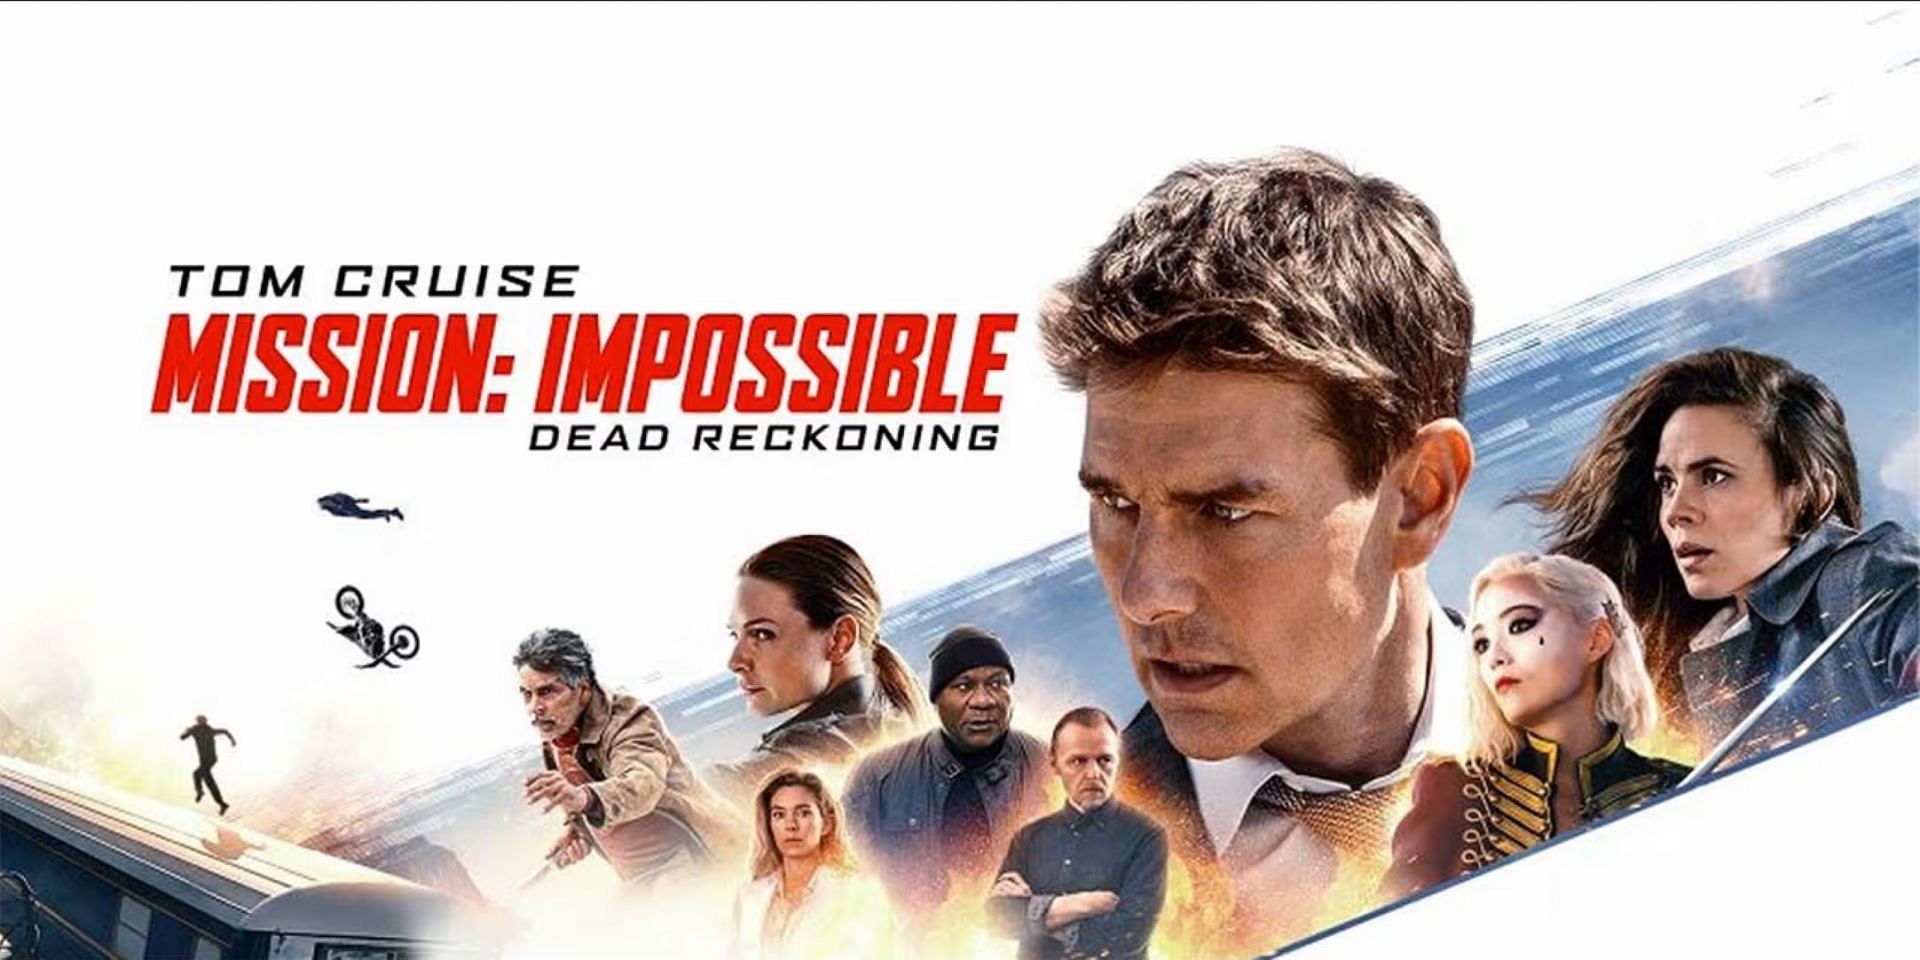 Mission Impossible 7 promotional poster (Image via Skydance/TC productions/Paramount Pictures)